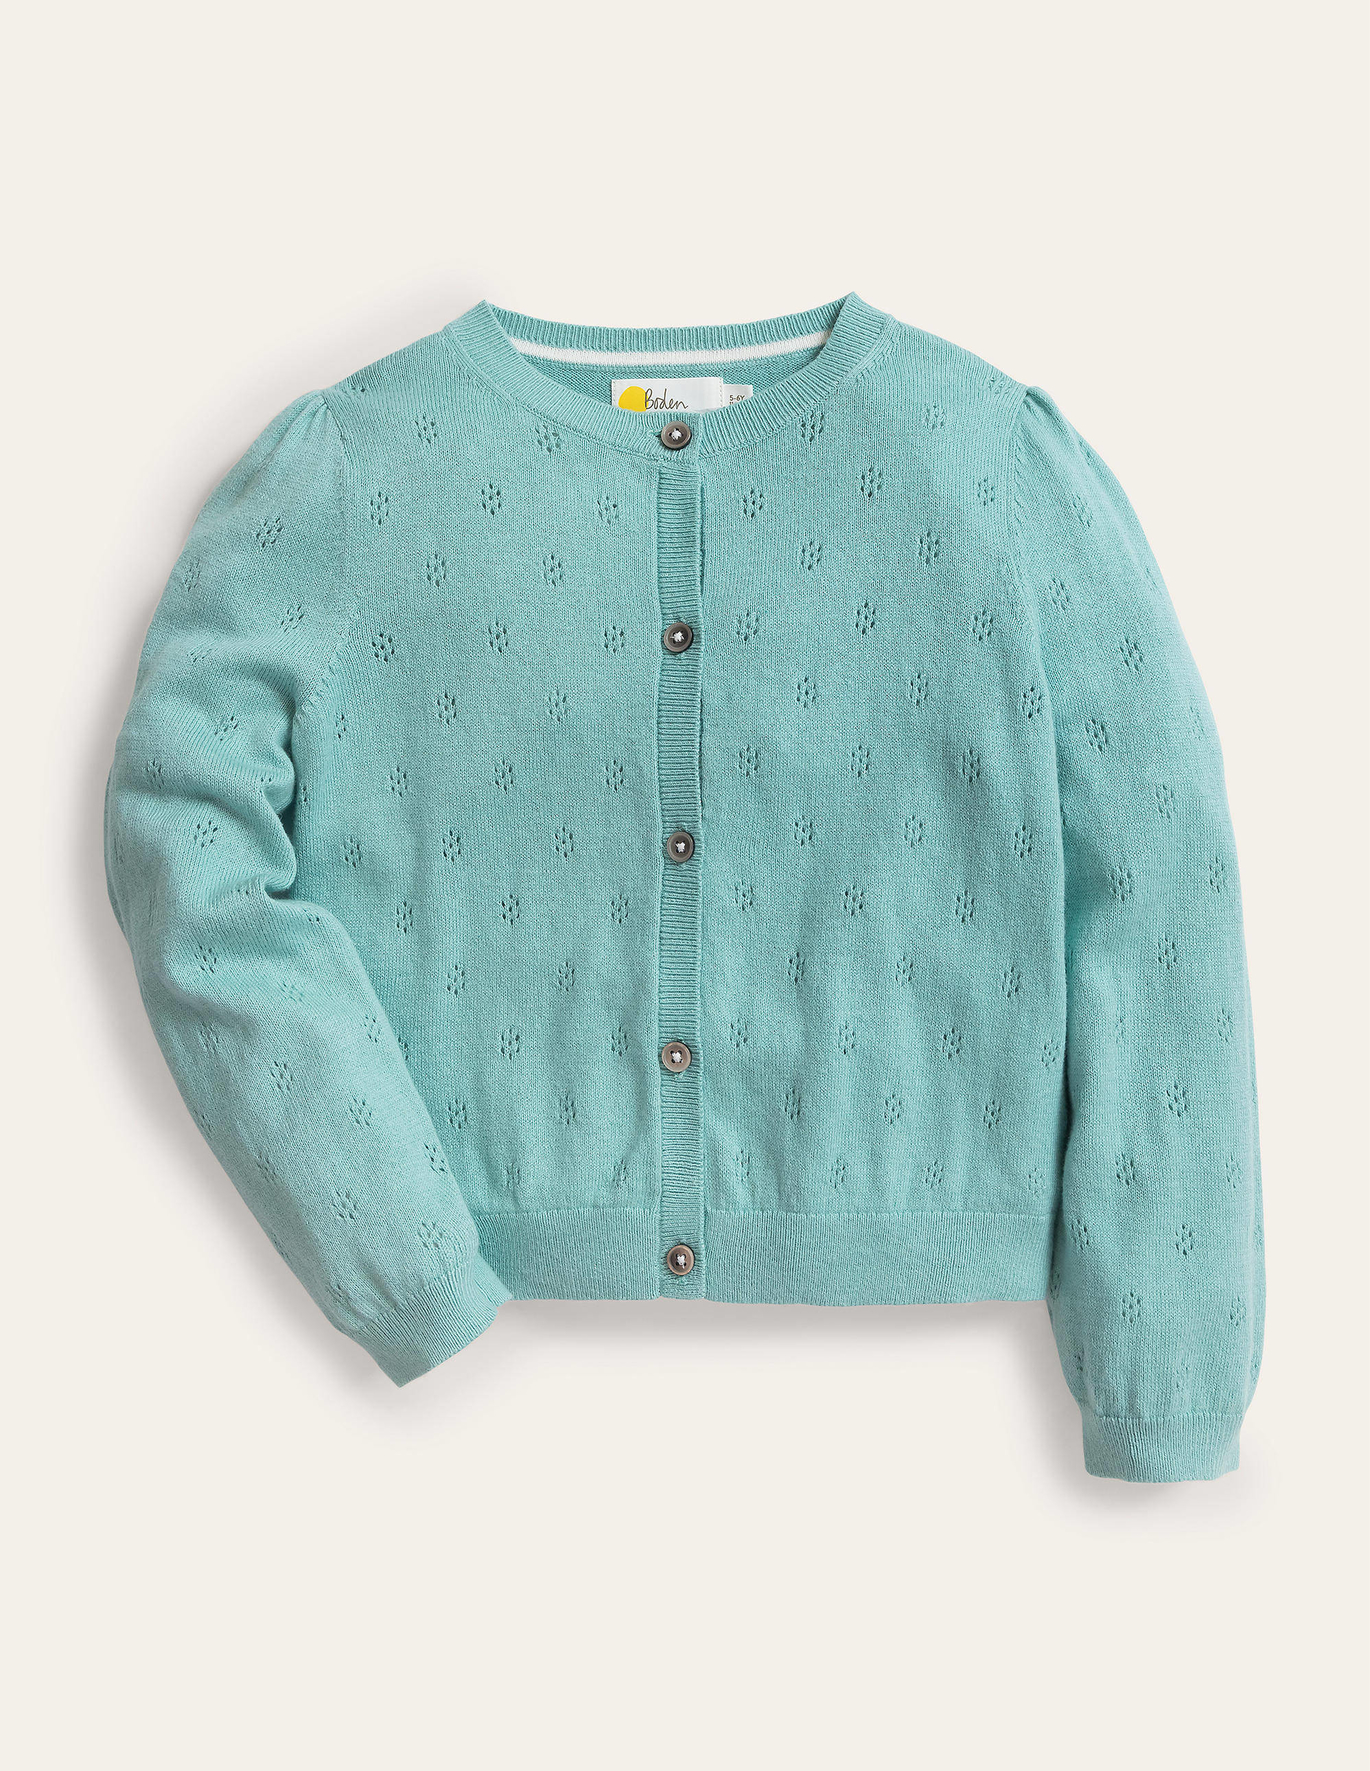 Boden Cotton Cashmere Cardigan - Hot Spring